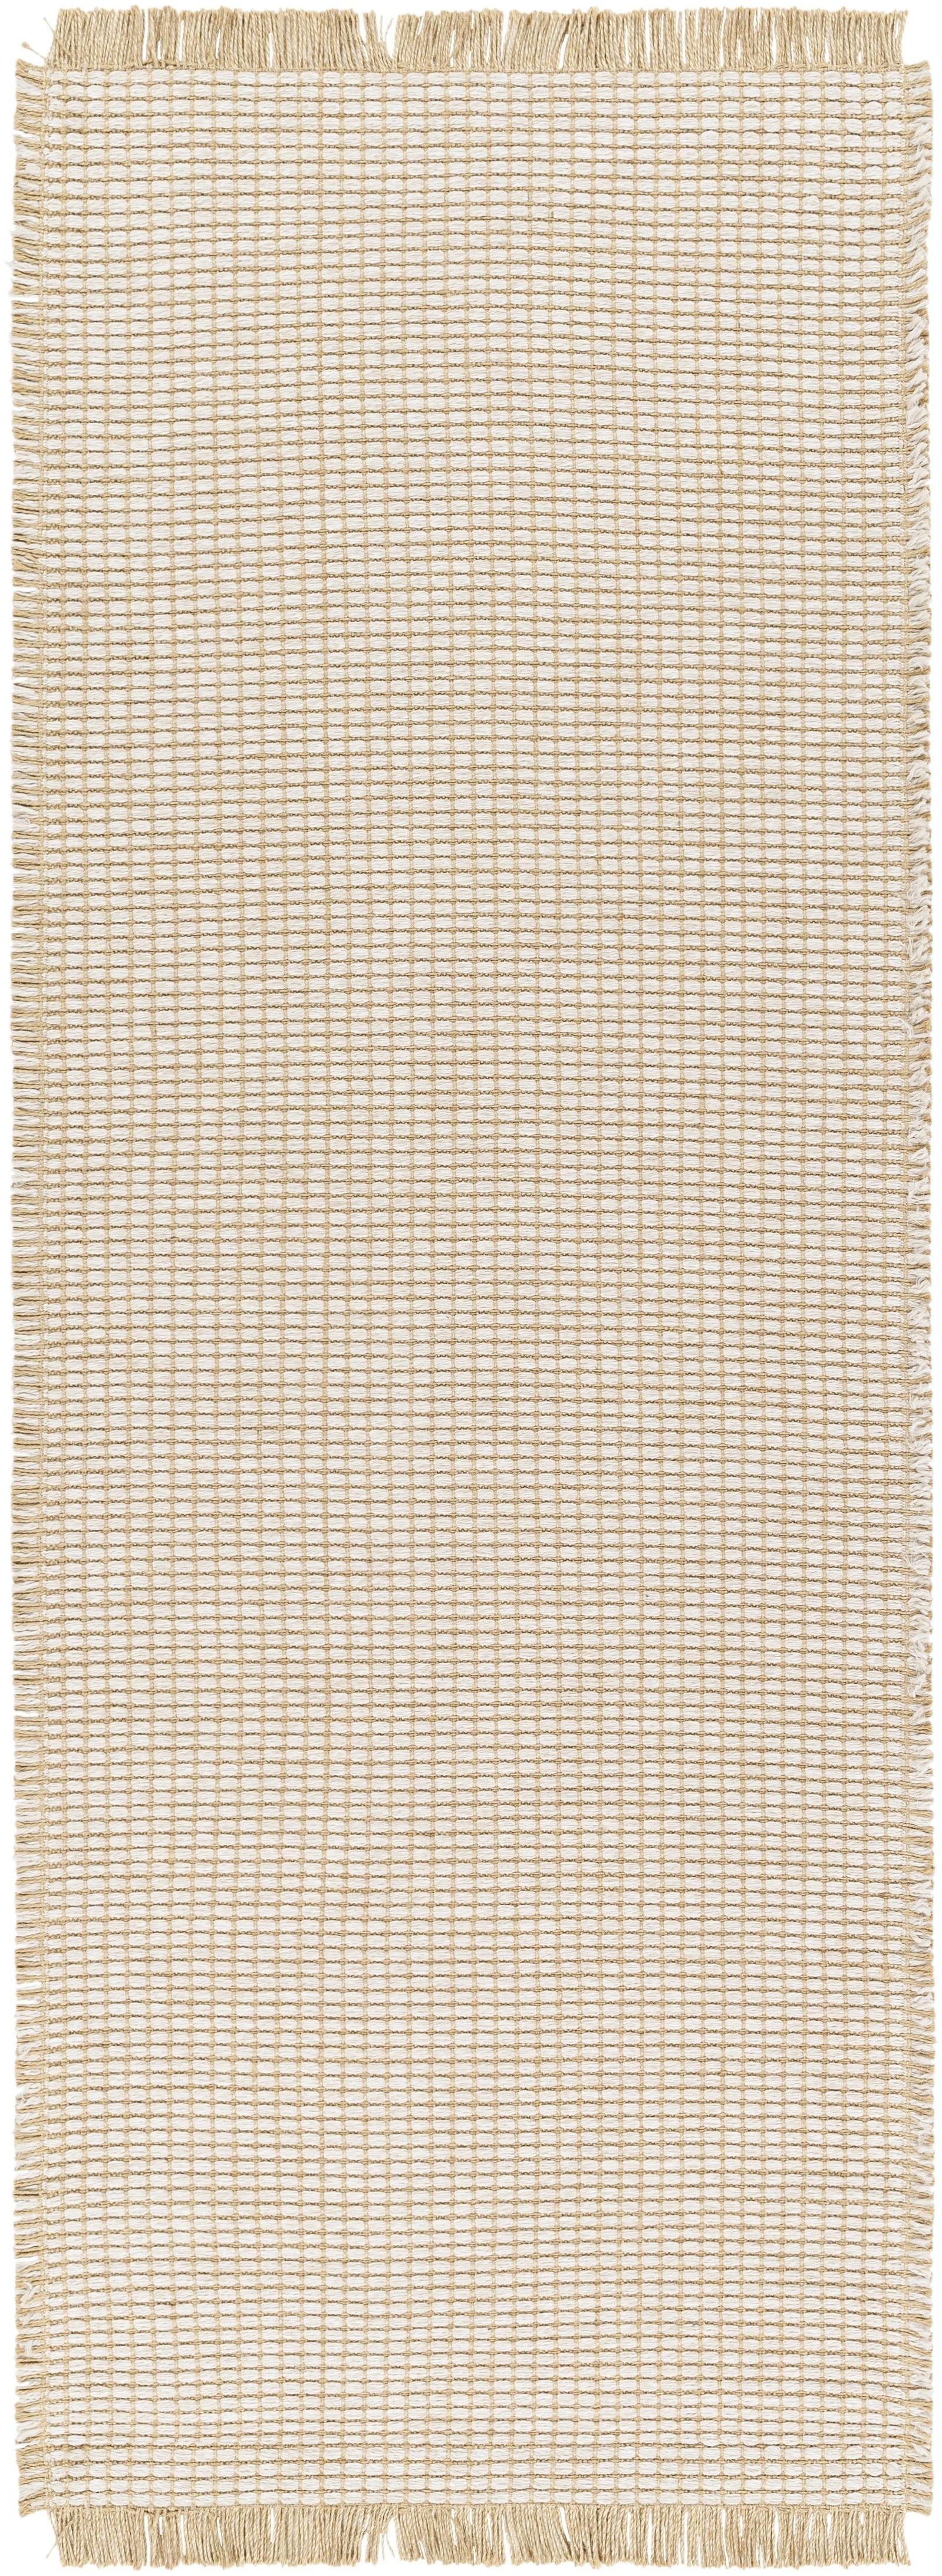 This unique and exquisite Kimi area rug is a special collaboration piece from our Becki Owens x Surya line. The perfect addition to any space, this beautiful rug features a unique stitched design made of polypropylene and jute. Amethyst Home provides interior design, new home construction design consulting, vintage area rugs, and lighting in the Laguna Beach metro area.